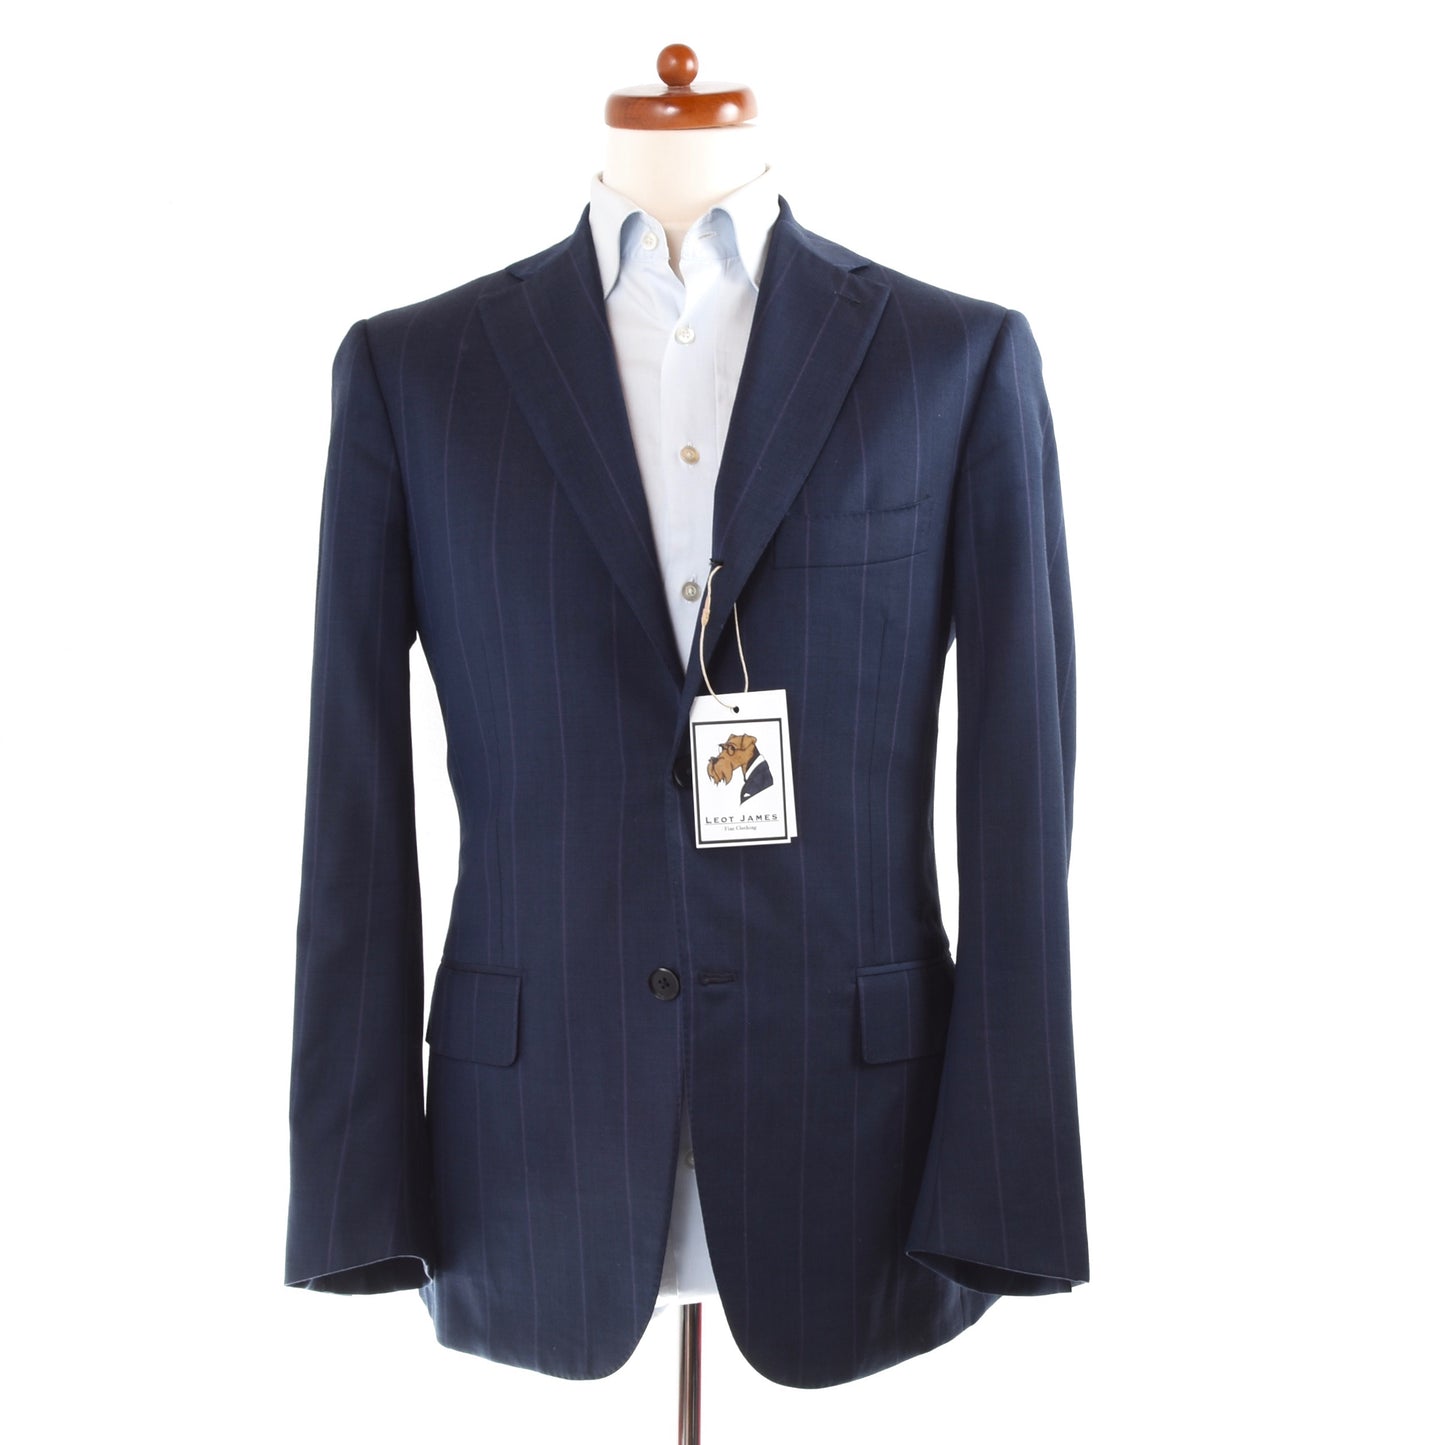 Isaia Napoli Super 130s Wool Suit Size 46 - Blue Stiped